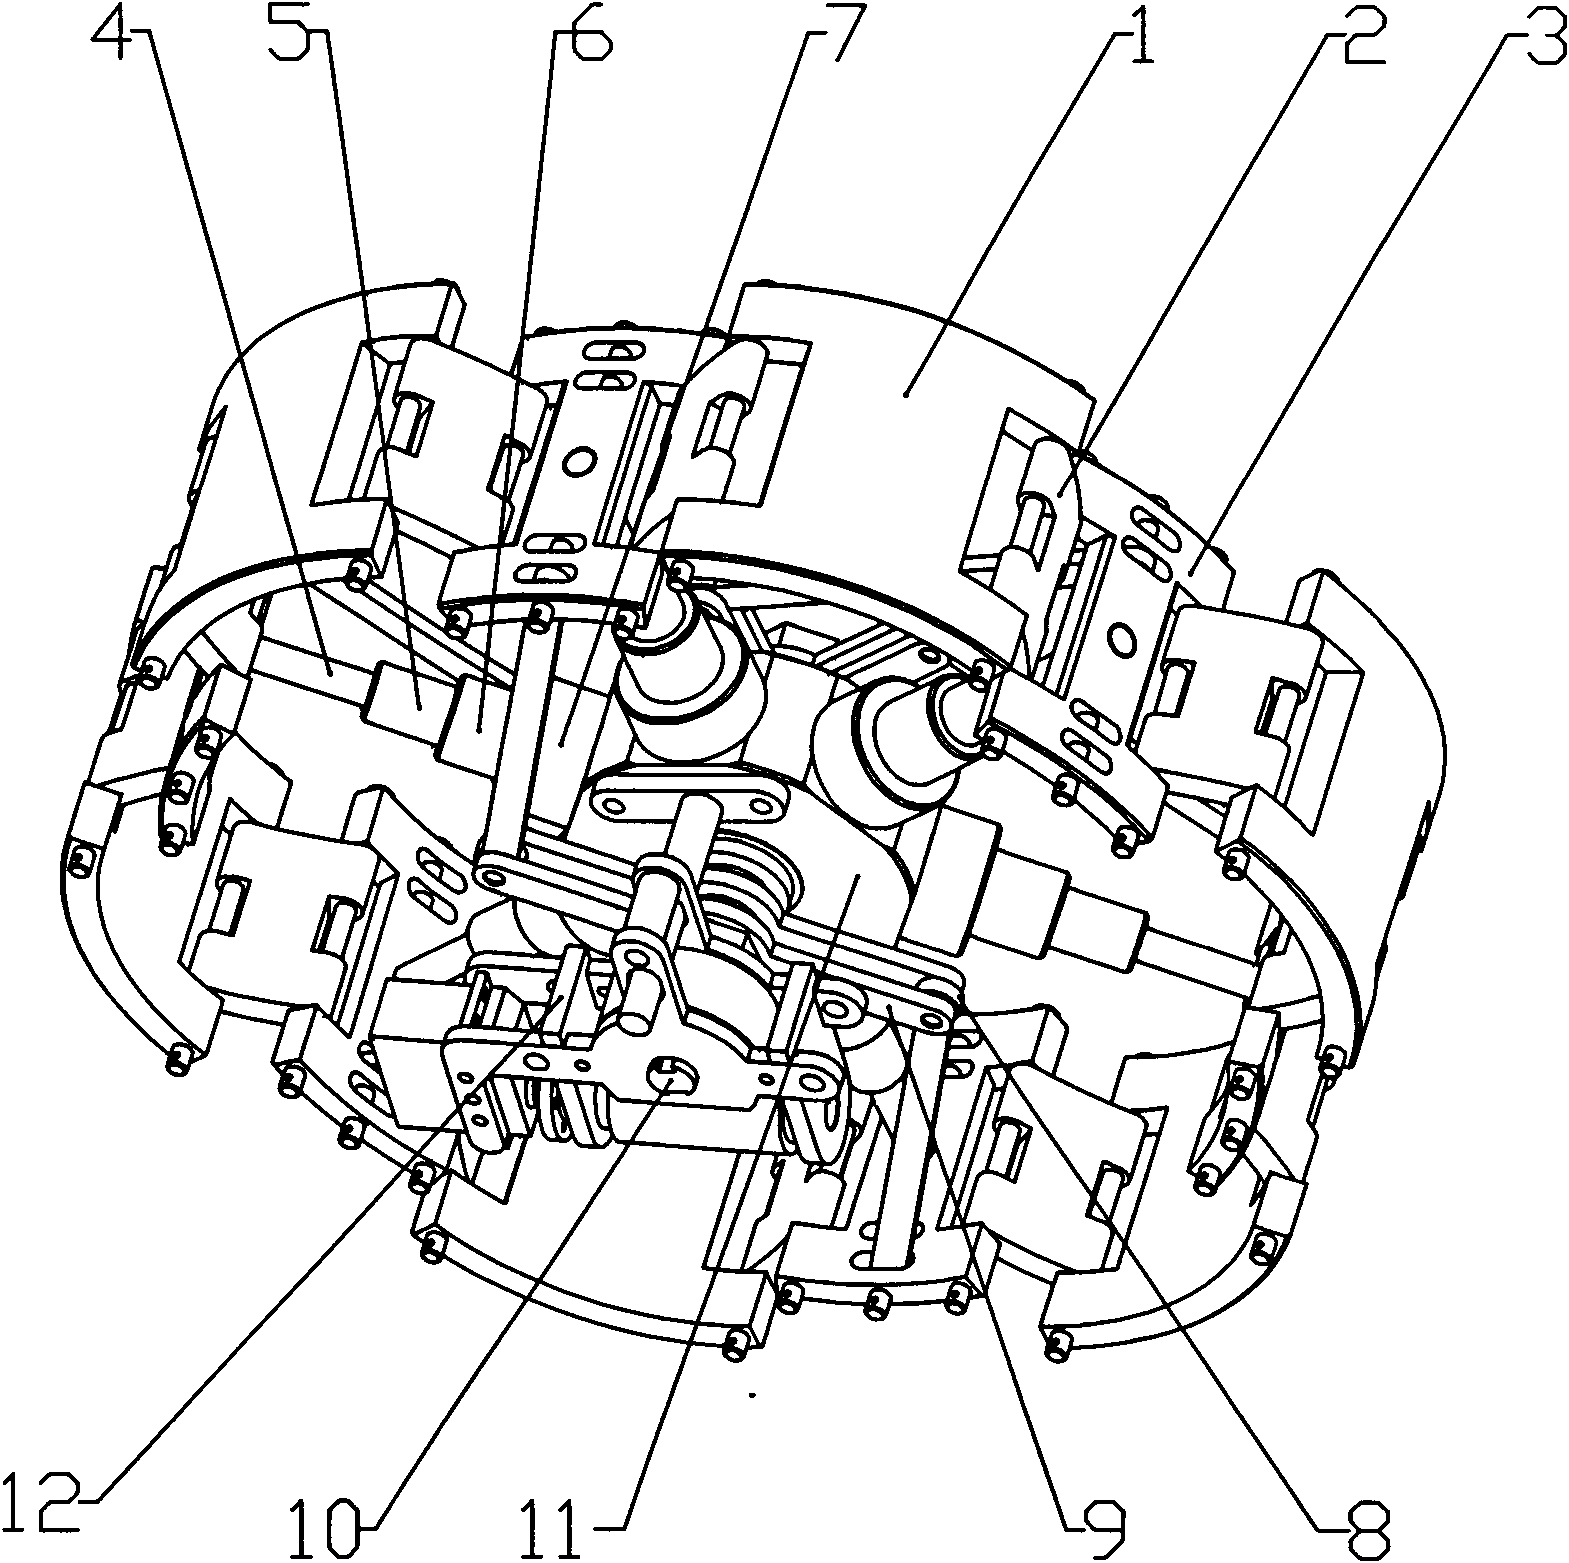 Diameter-variable wheel for automatically adapting to road surface